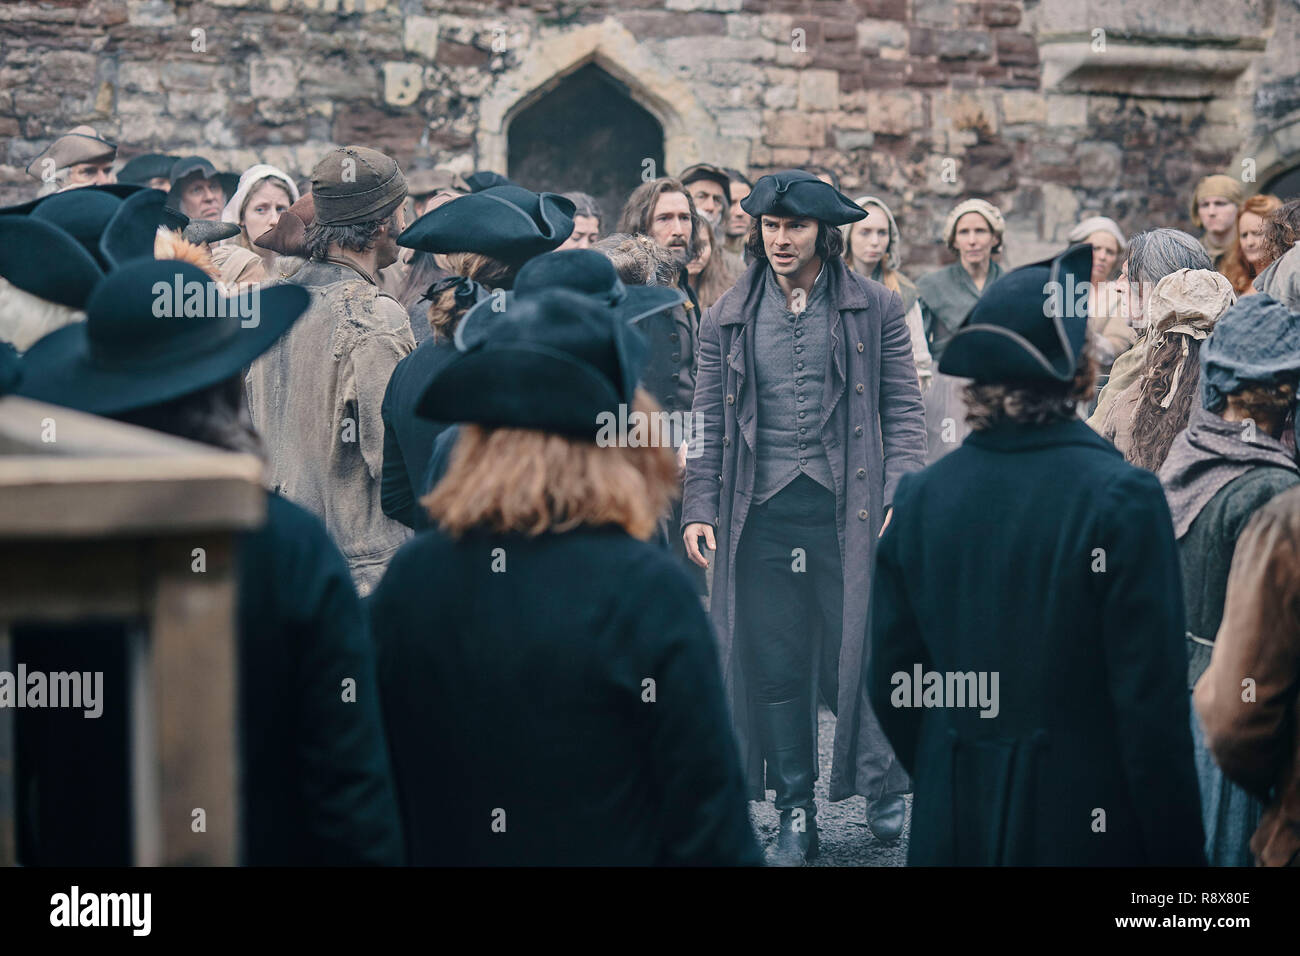 POLDARK, Aidan Turner (center), (Season 4, ep. 401, originally aired in UK on June 10, 2018/aired in US on Sept. 30, 2018). photo: ©PBS/Mammoth Screen/BBC / Courtesy: Everett Collection Stock Photo